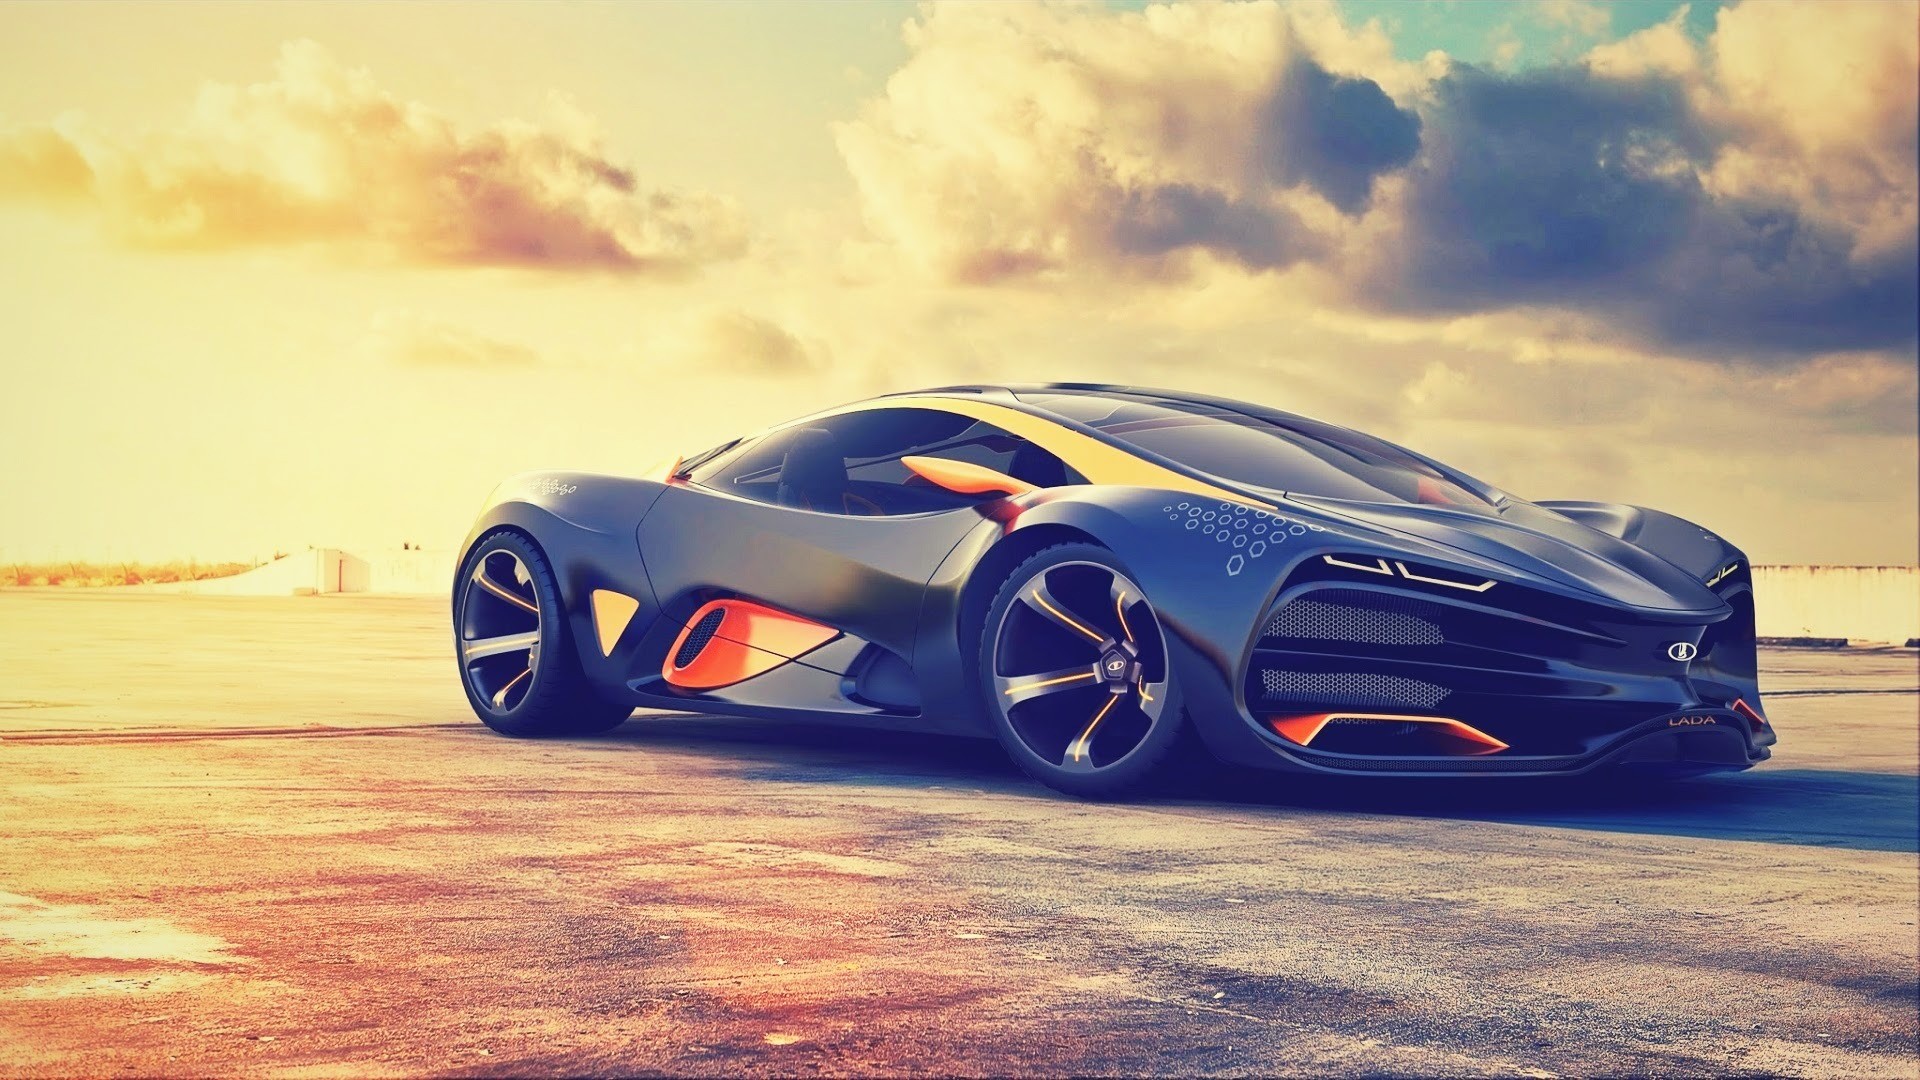 Download Bmw concept car - Cars wallpapers- For Mobile Phone